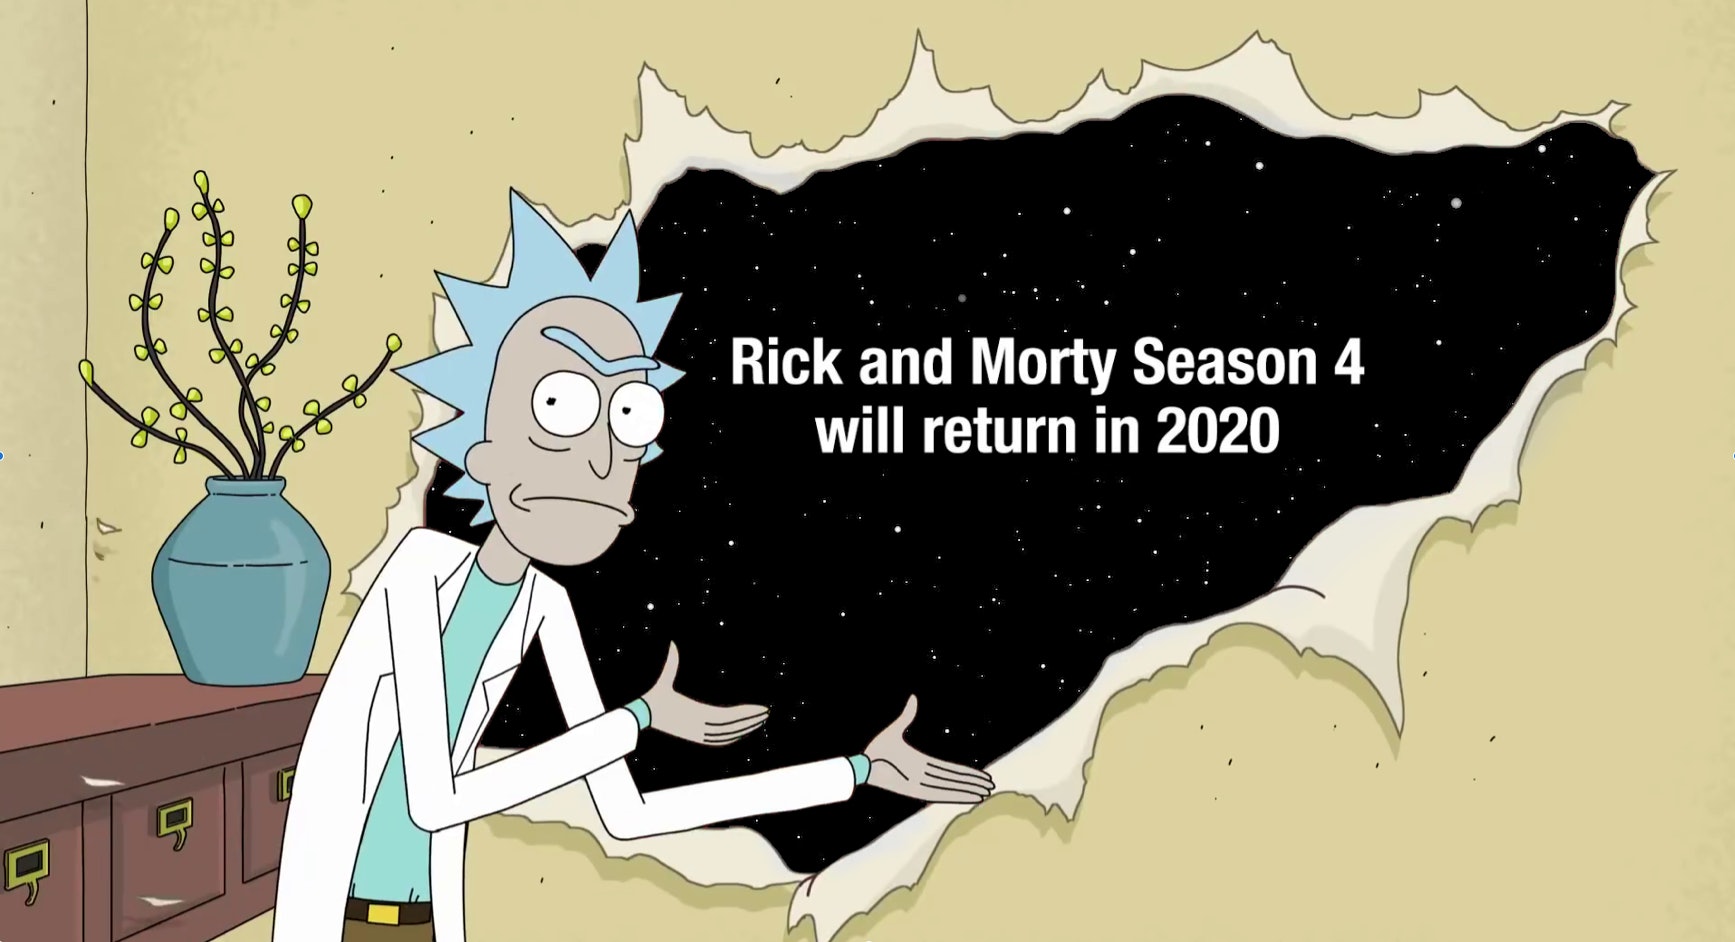 Rick And Morty Season 4 Episode 6 Release Date Could Be Revealed